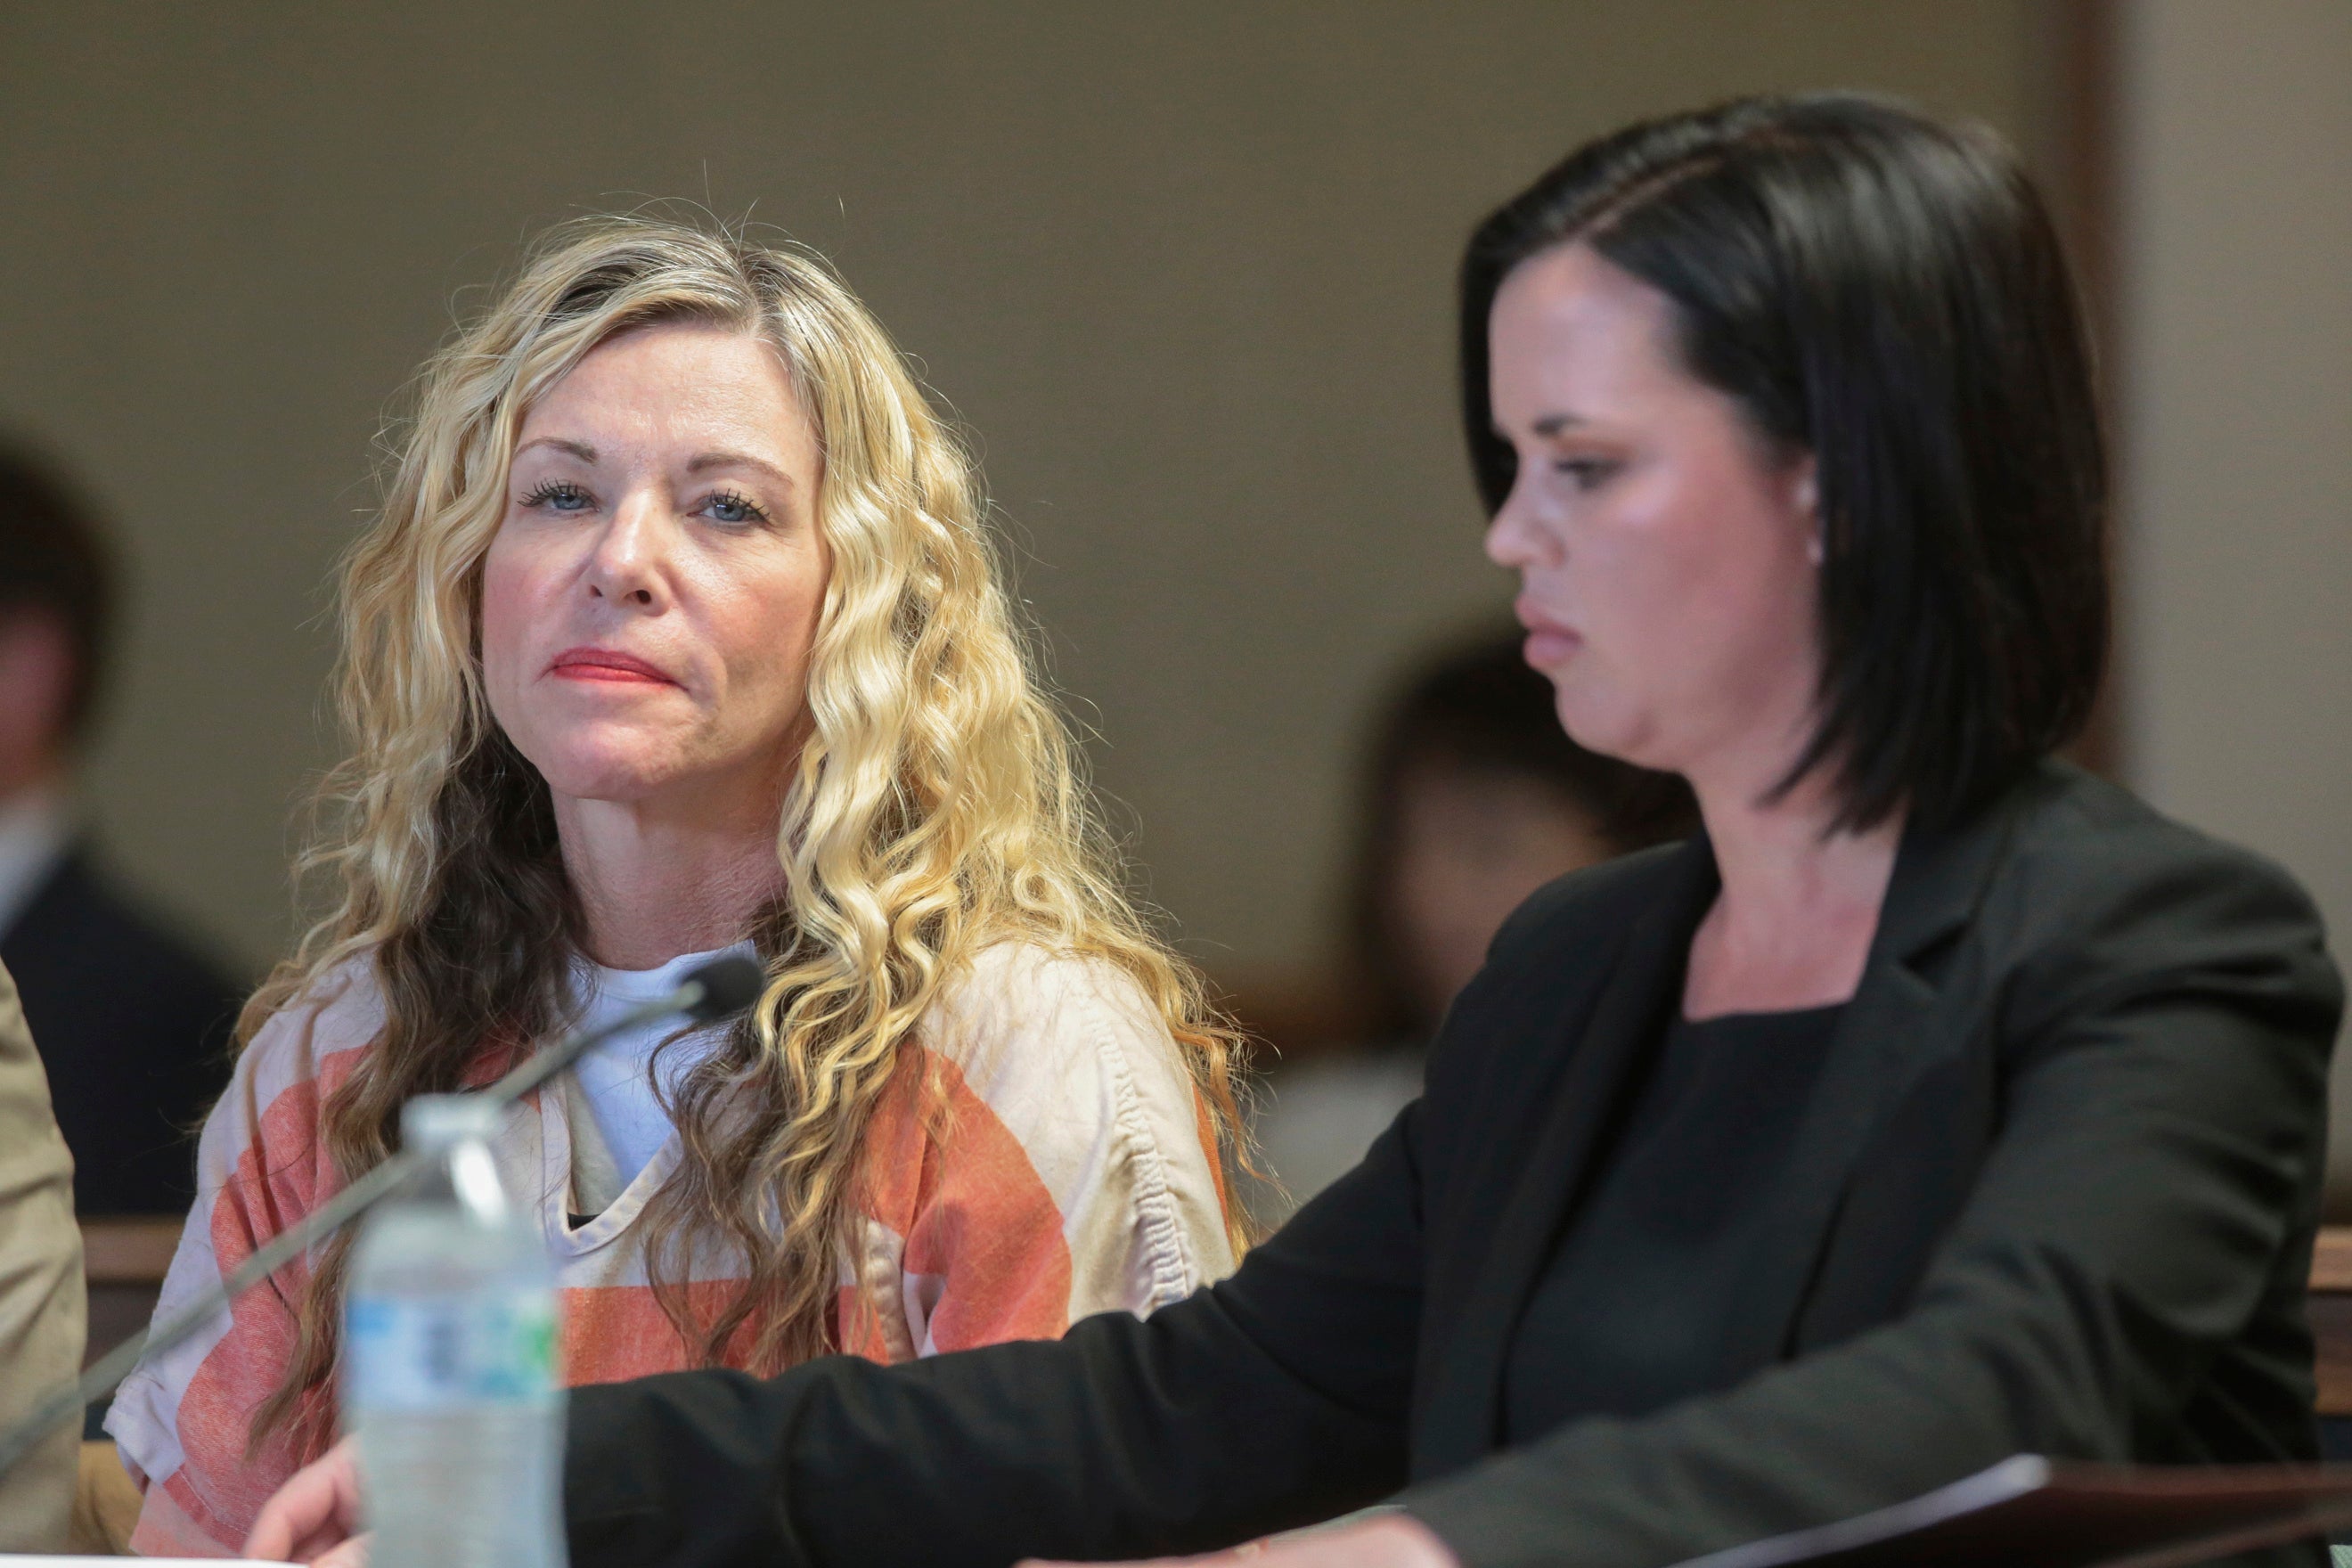 Lori Vallow Daybell glances at the camera during a hearing in Idaho in 2020